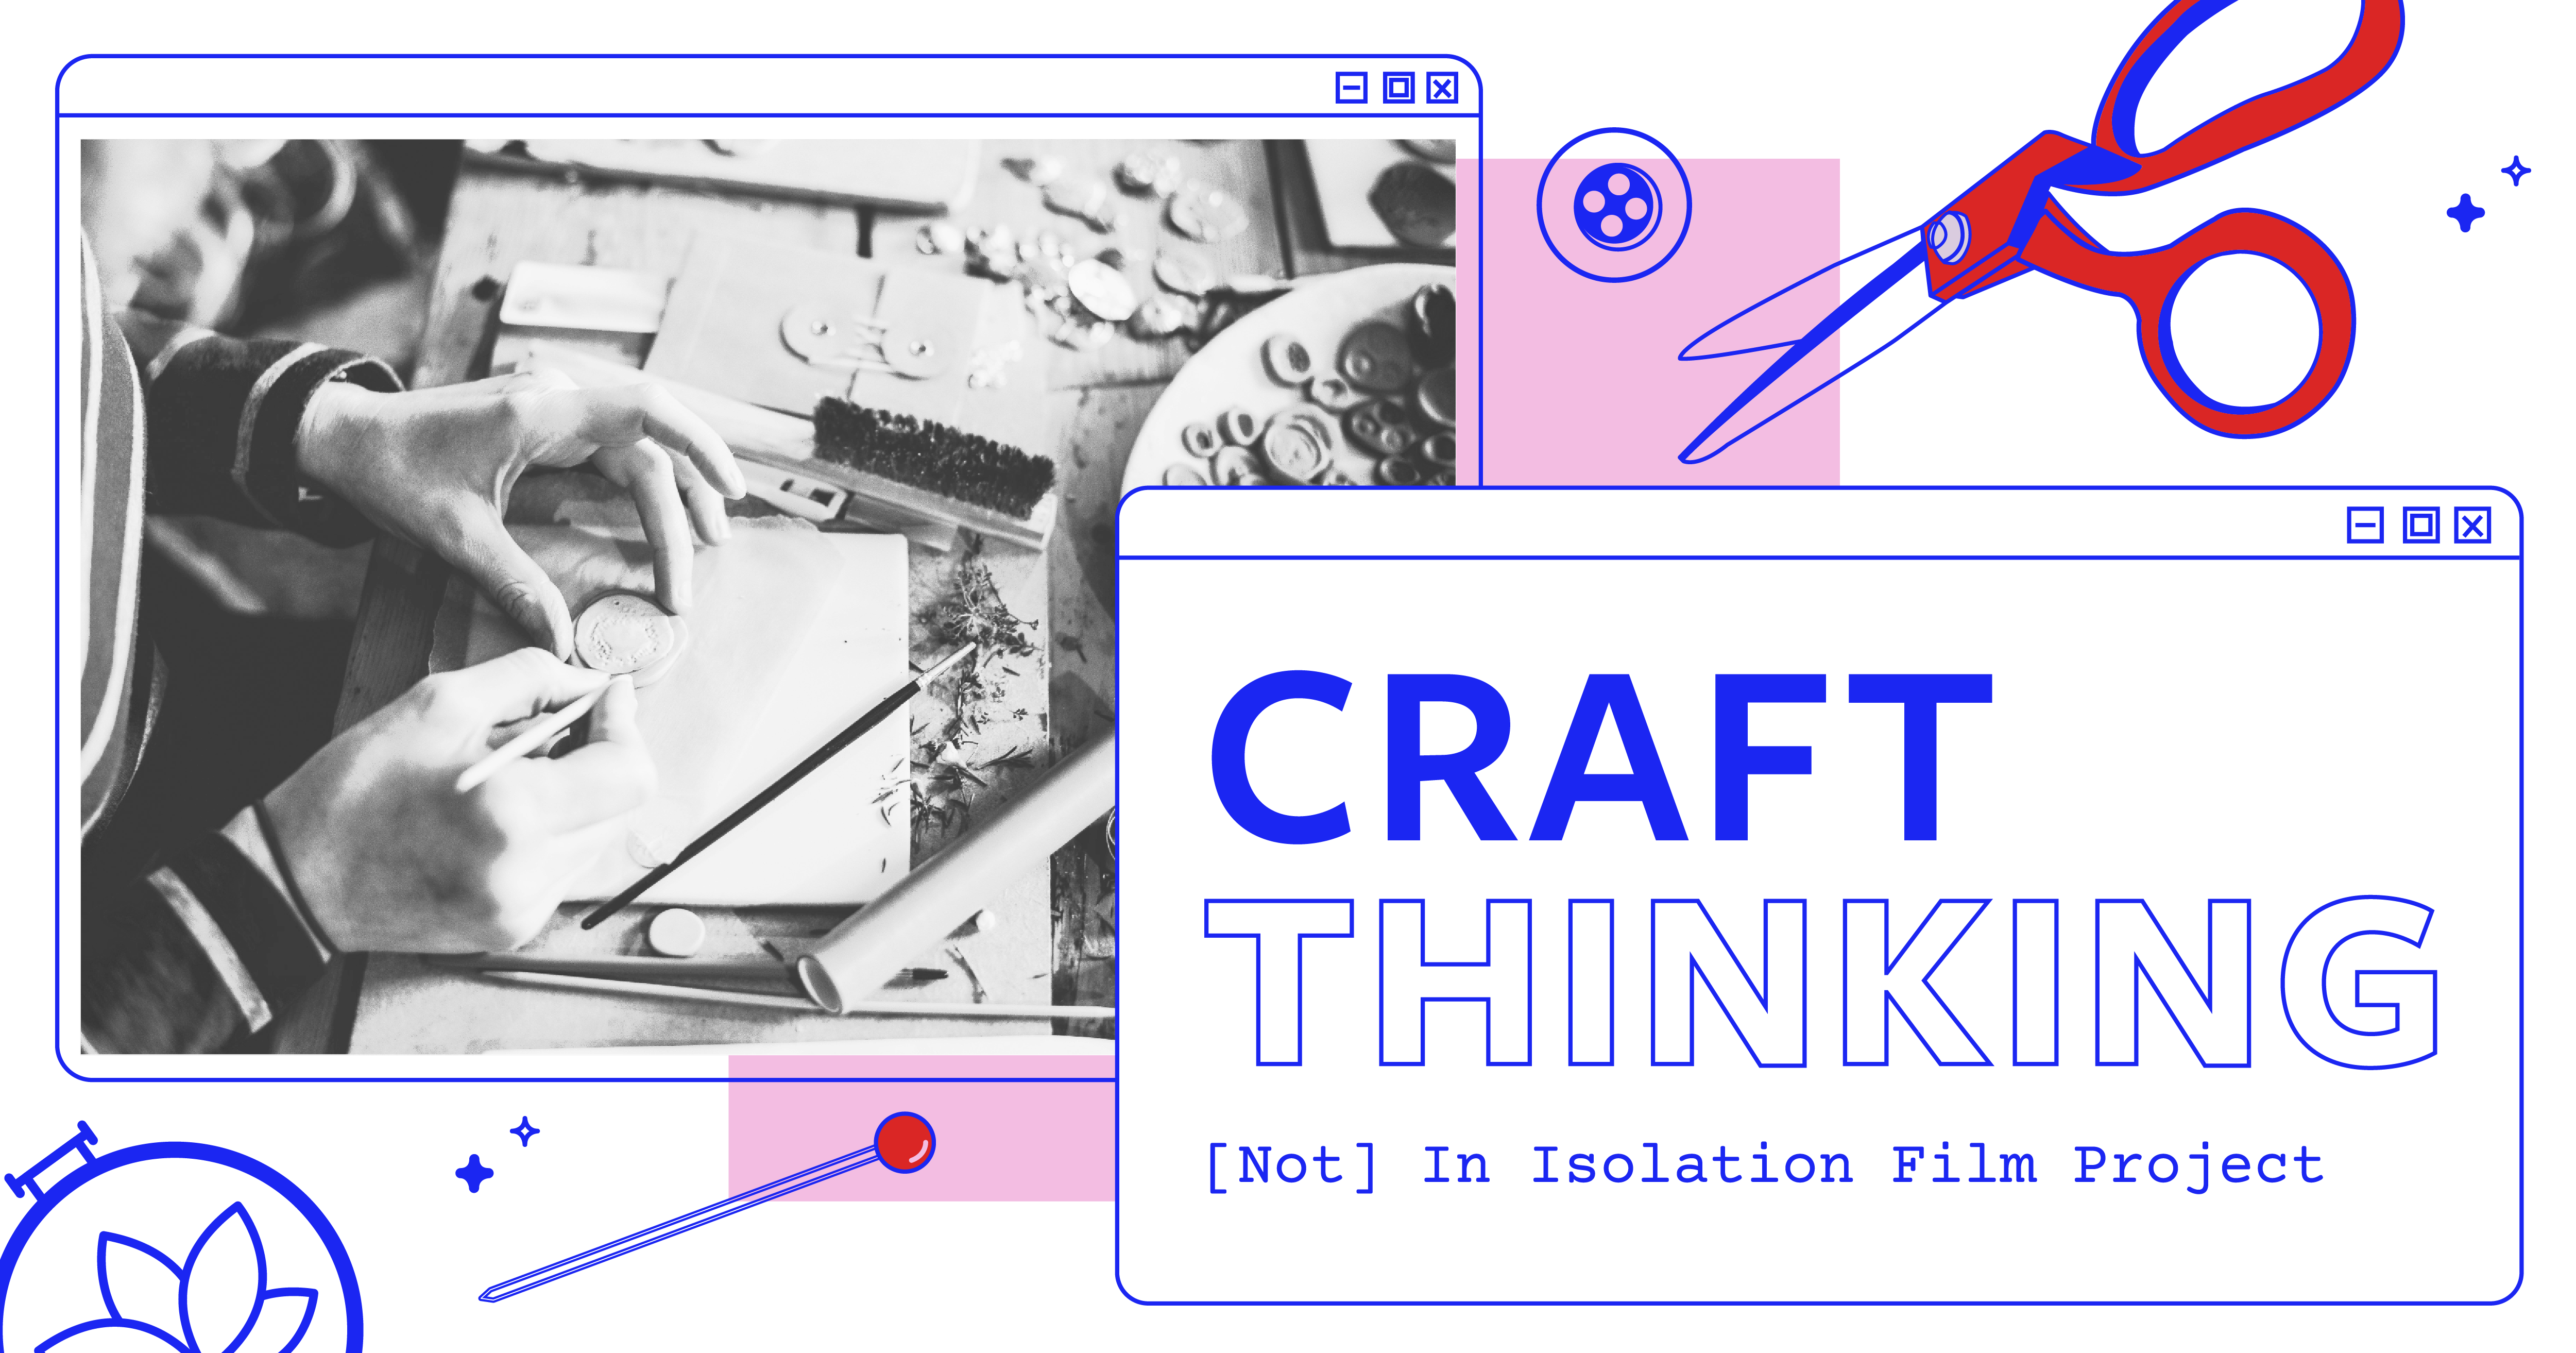 Craft Thinking Not In Isolation Film Project Header